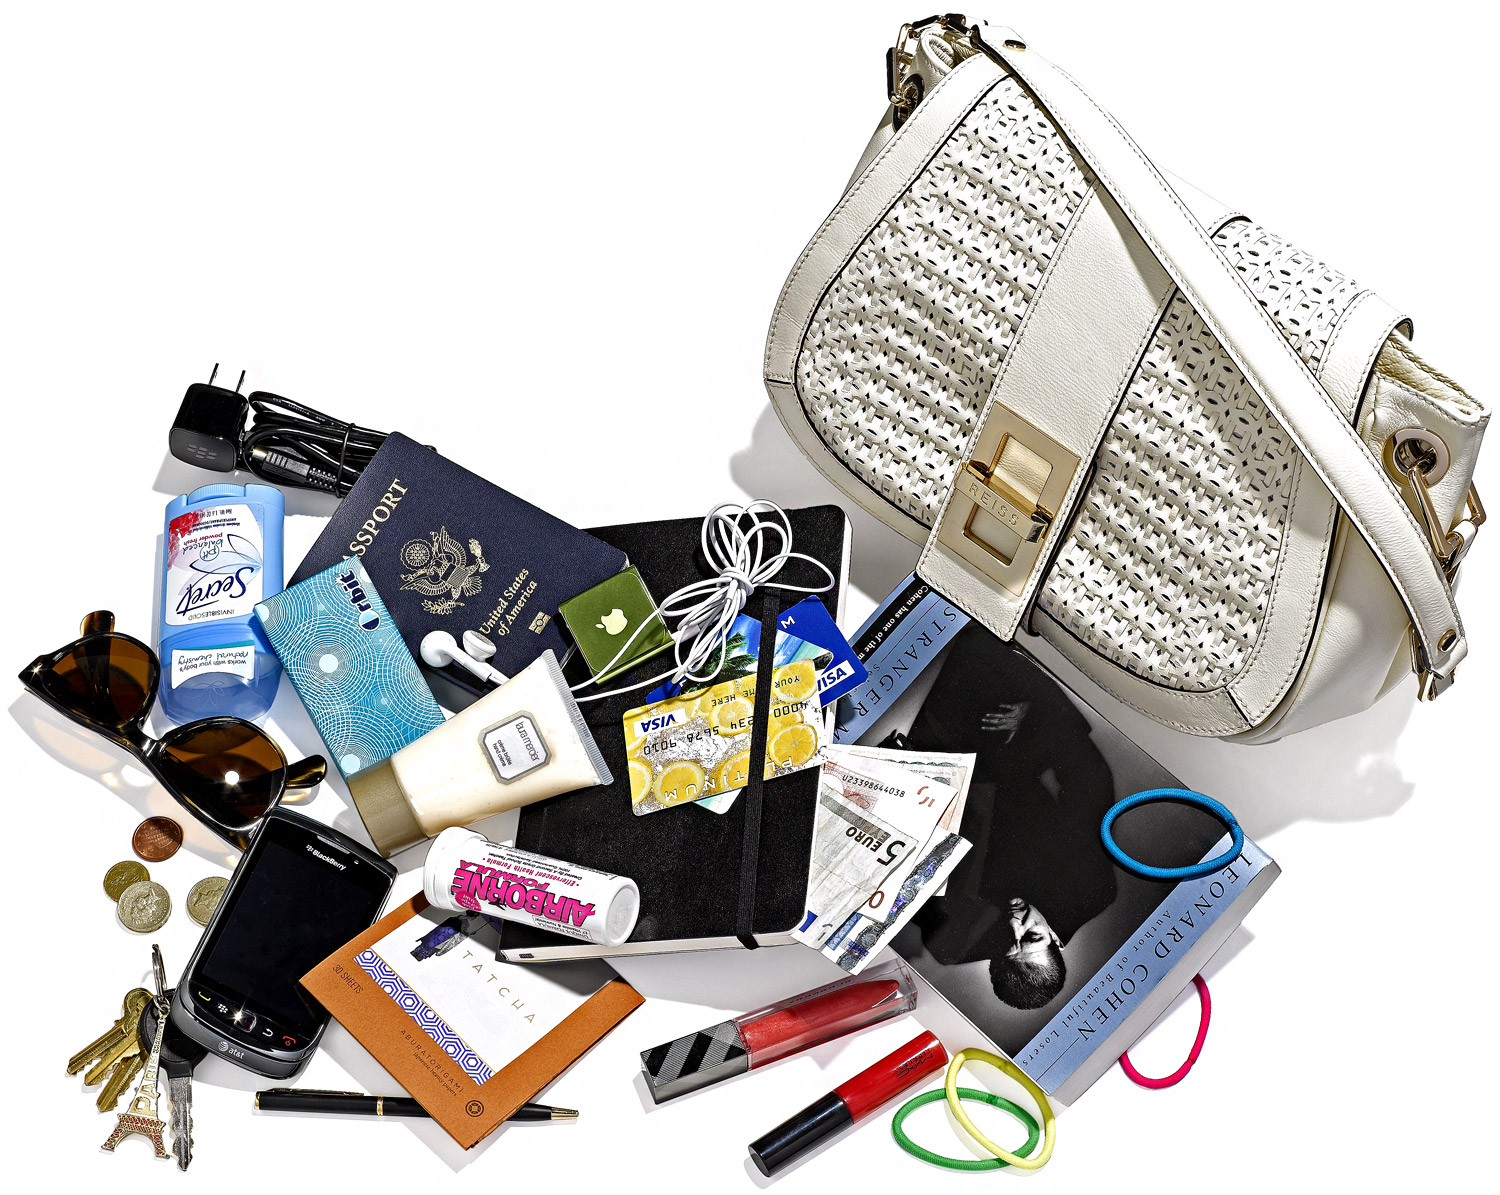 What is in your Bag. What's in your Wallet. Whatis in your Bag. Where is my bag